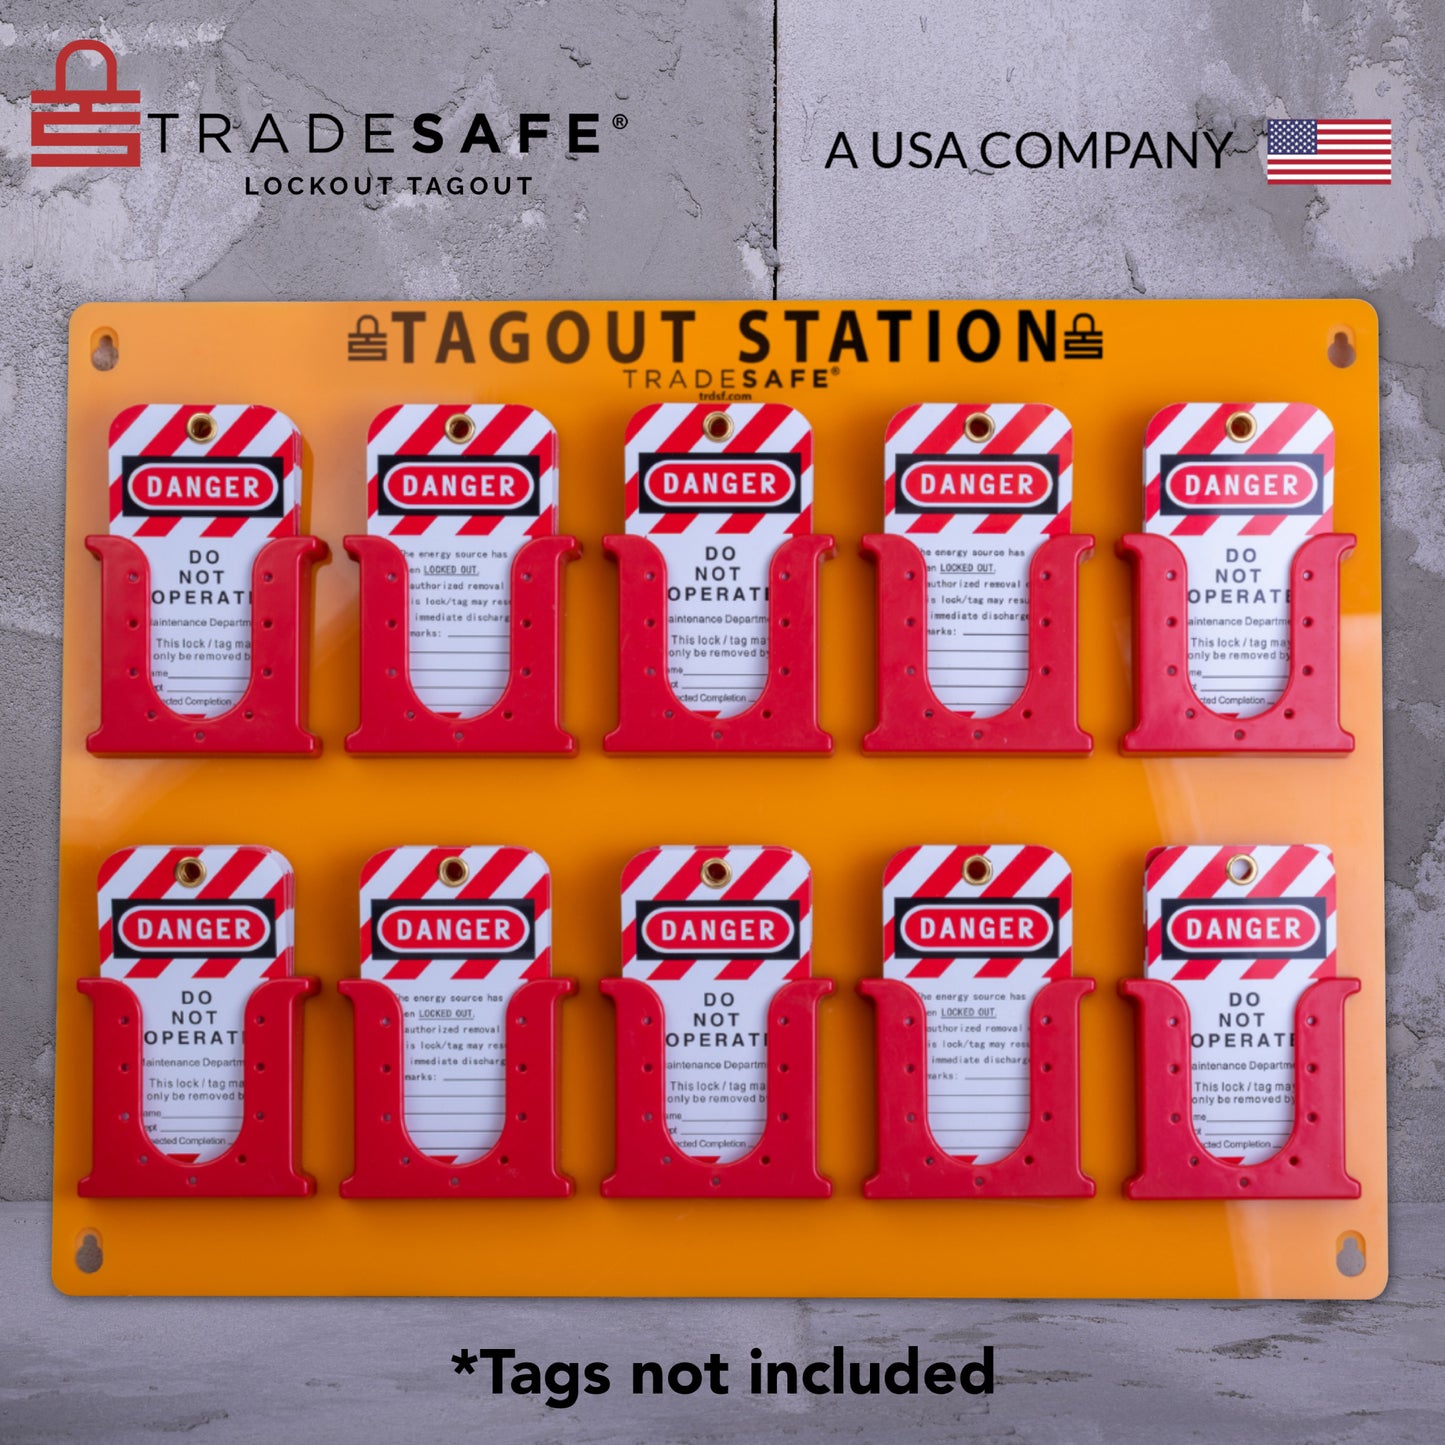 eye-level view of an orange tag station with 10 red tag boxes stocked with loto tags